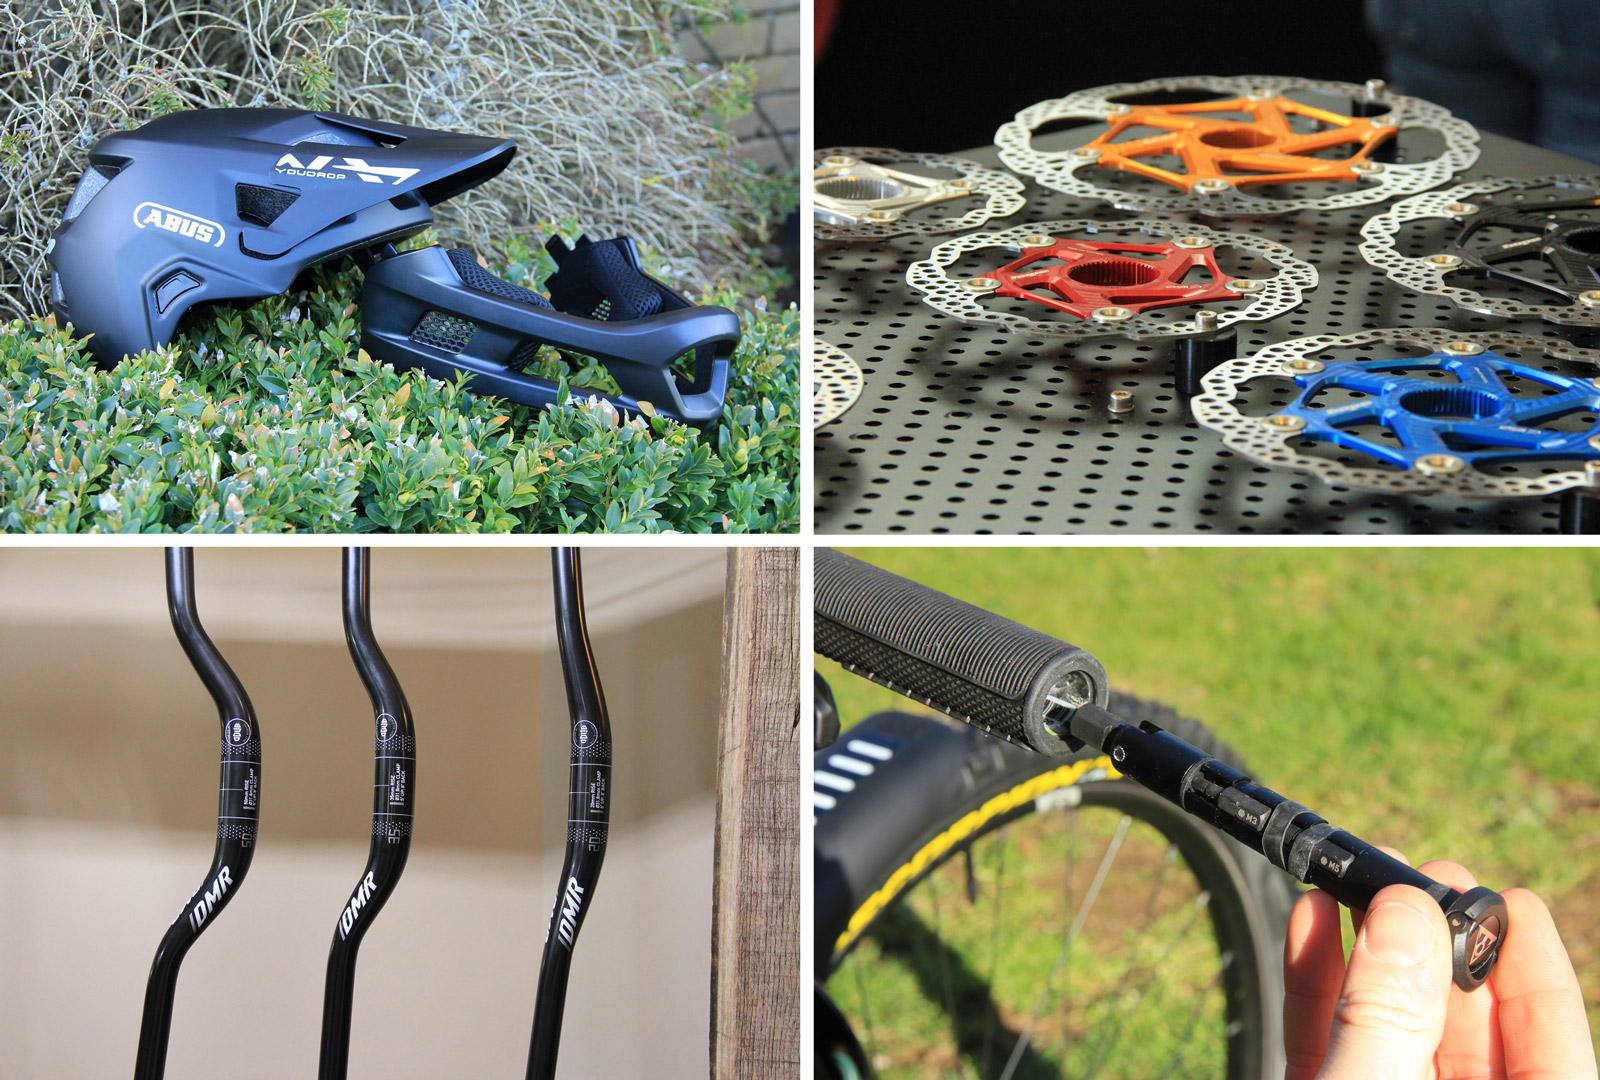 New Mountain Bike Components, Gear, Tools and Protection at CORE